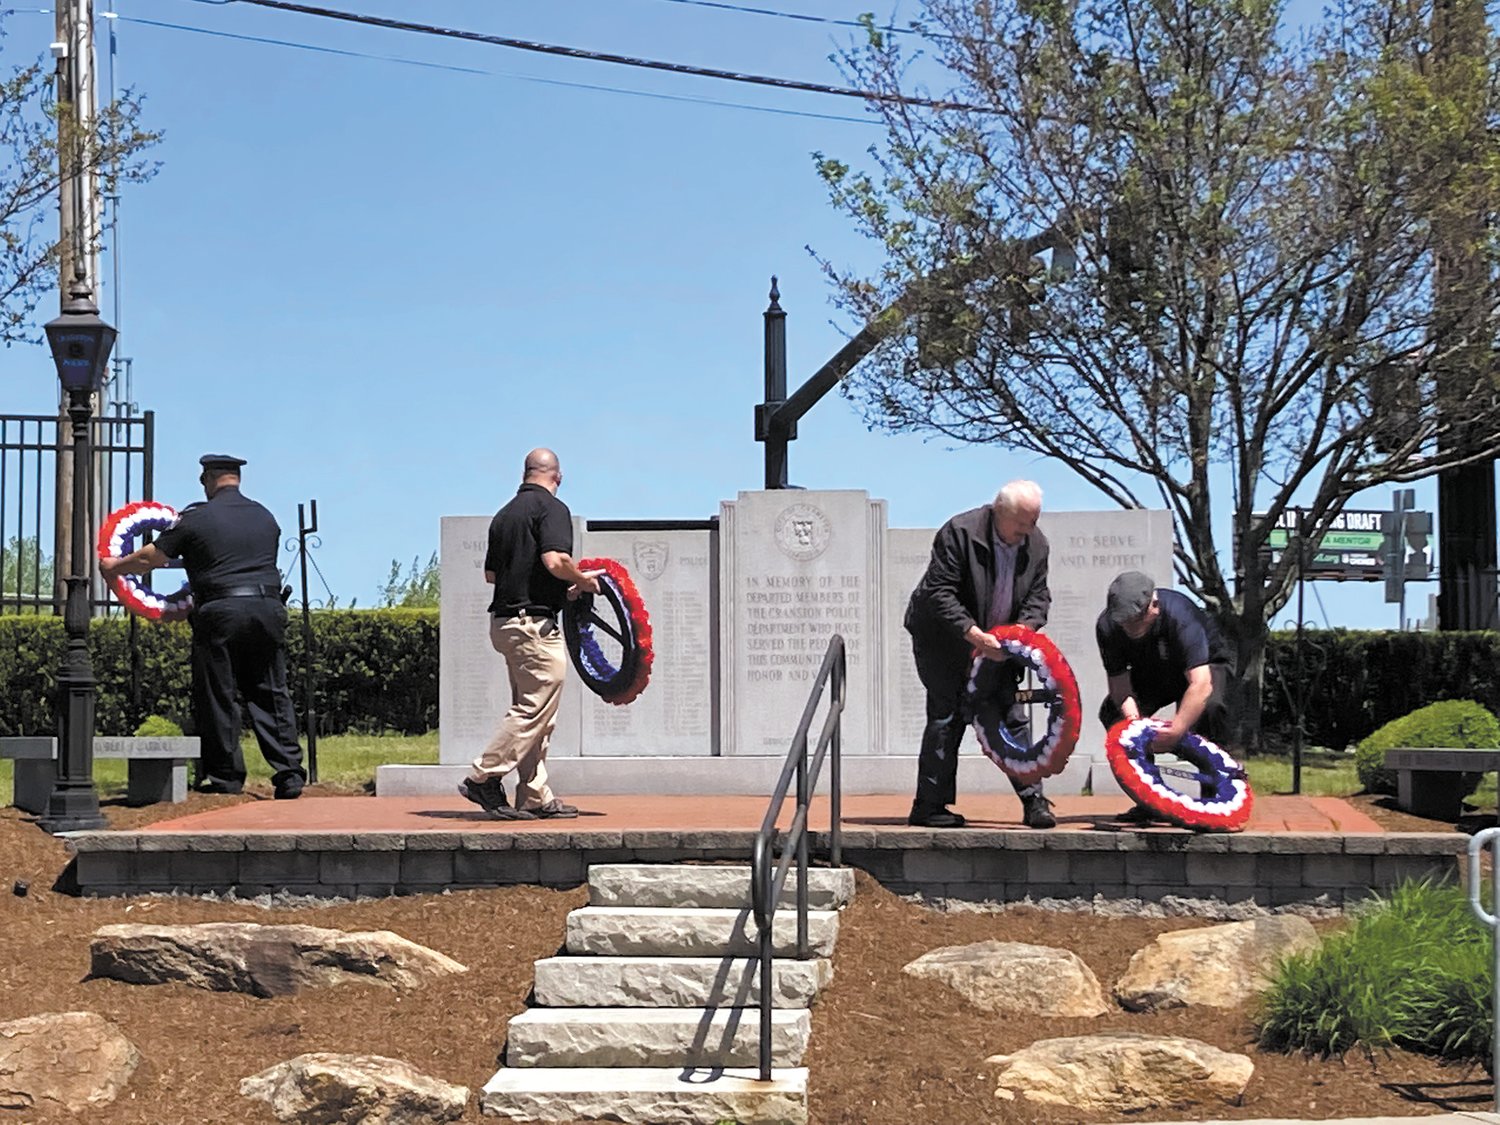 LAYING OF THE WREATHS: To honor law enforcement officers who lost their lives, individuals from the International Brotherhood of Police Officers, Cranston Police Relief Association, Cranston Police Retirees’ Association and Fraternal Order of Police laid the wreaths outside the Cranston Police Department.